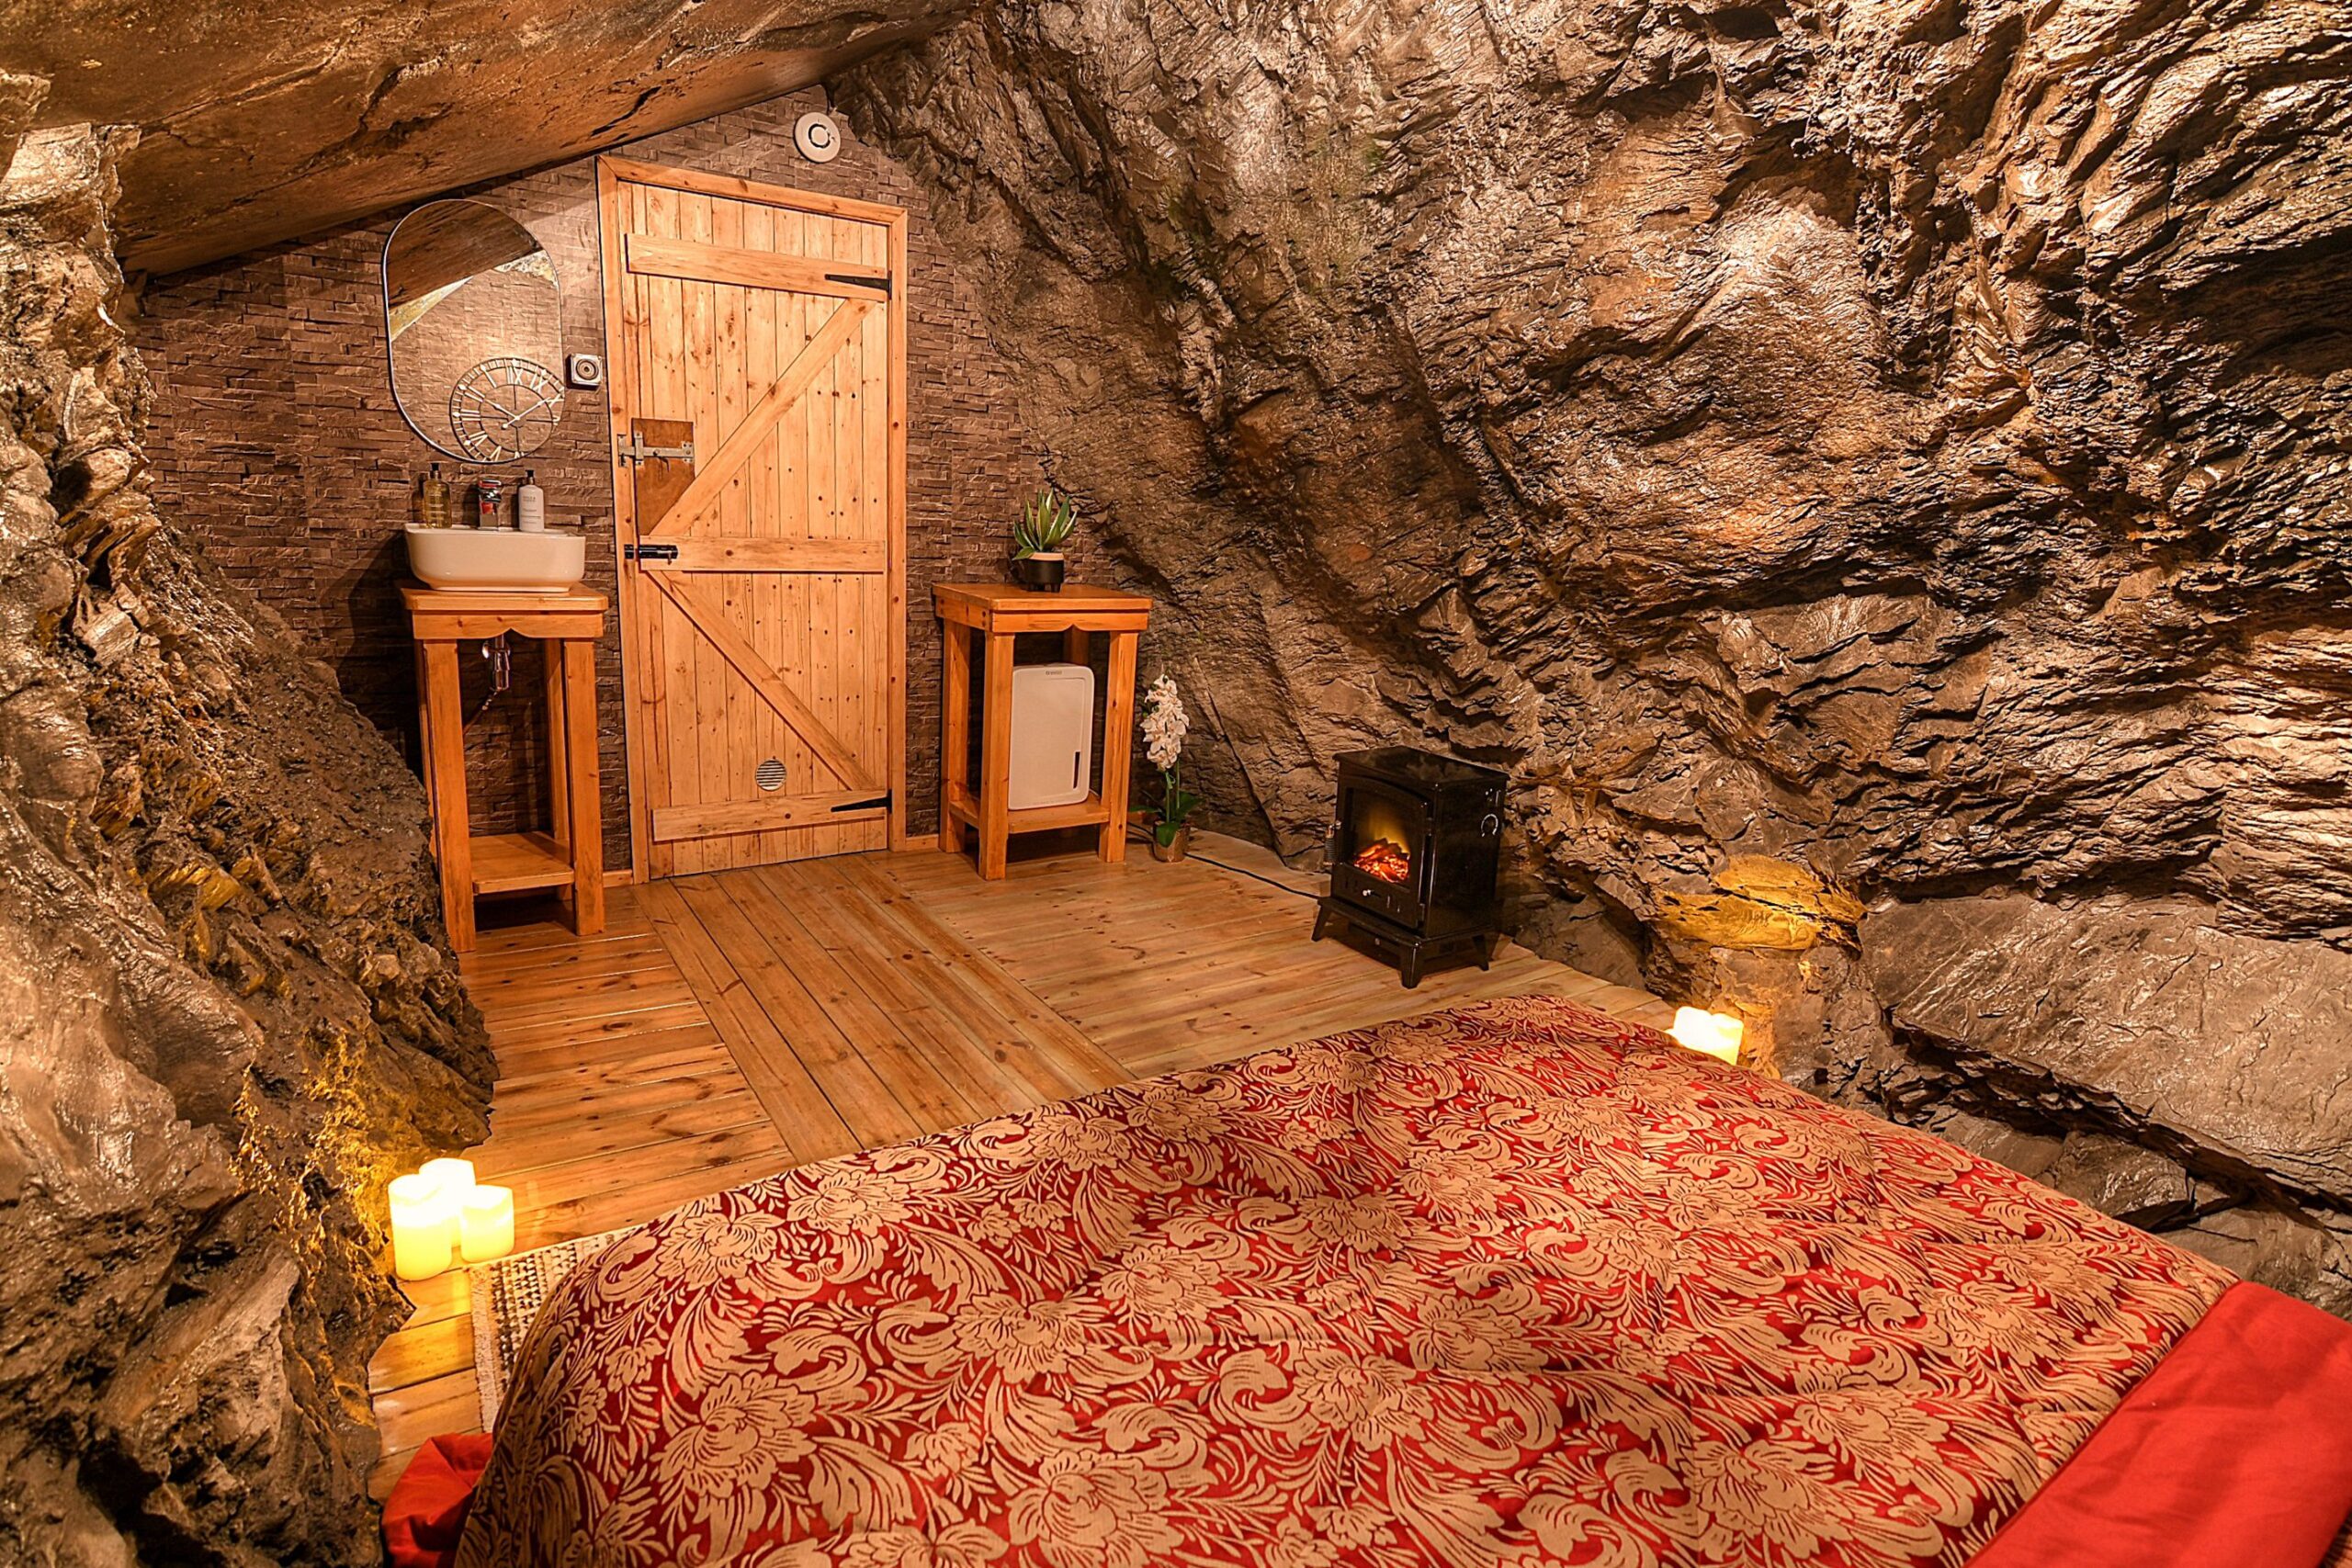 The deepest hotel has just opened in the UK